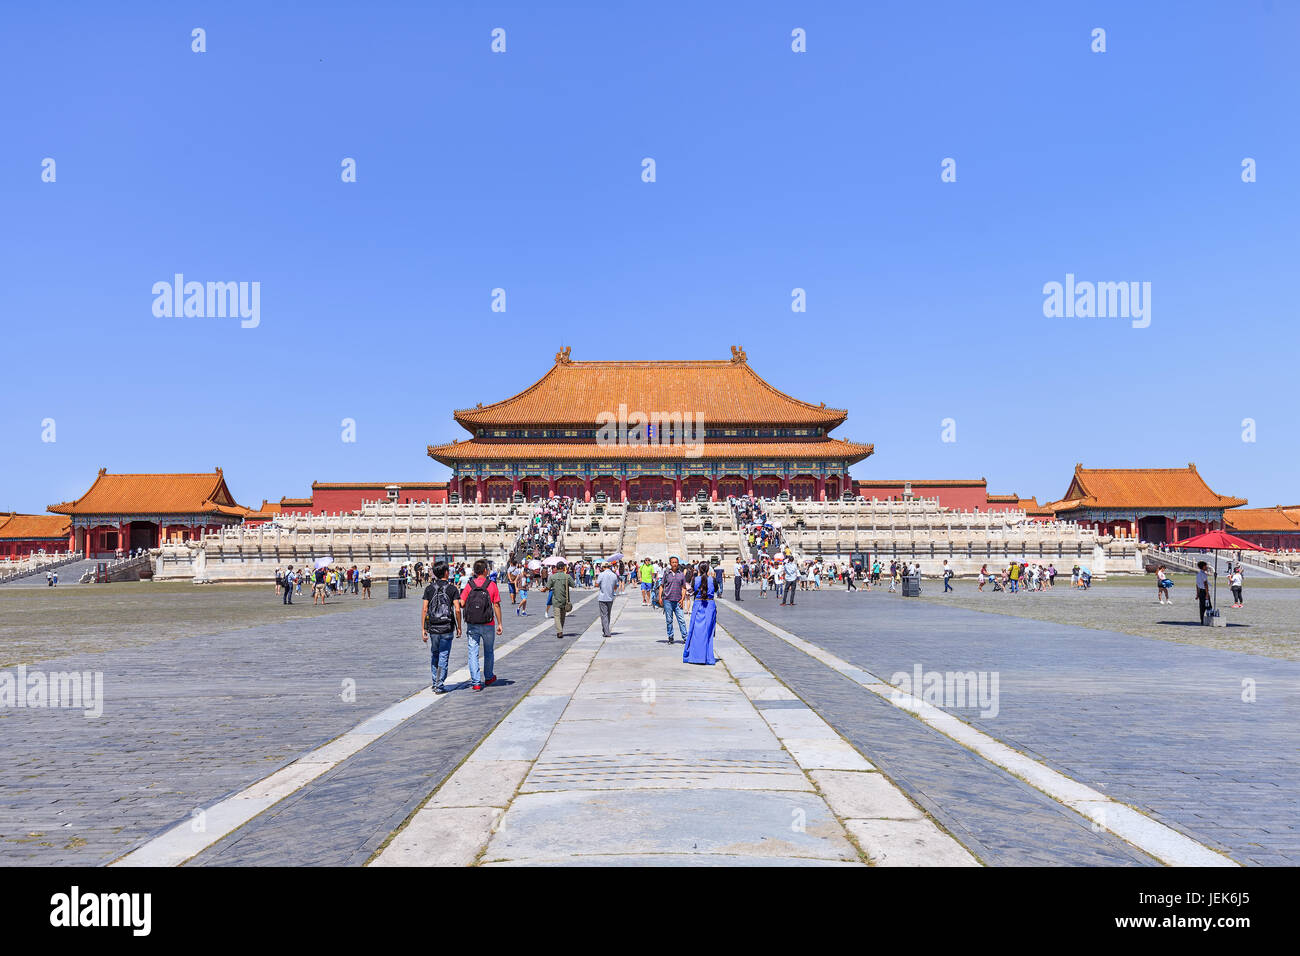 BEIJING-AUGUST 28, 2016. Tourism at Palace Museum (Forbidden City). It was listed as a World Heritage Site in 1987 by UNESCO. Stock Photo